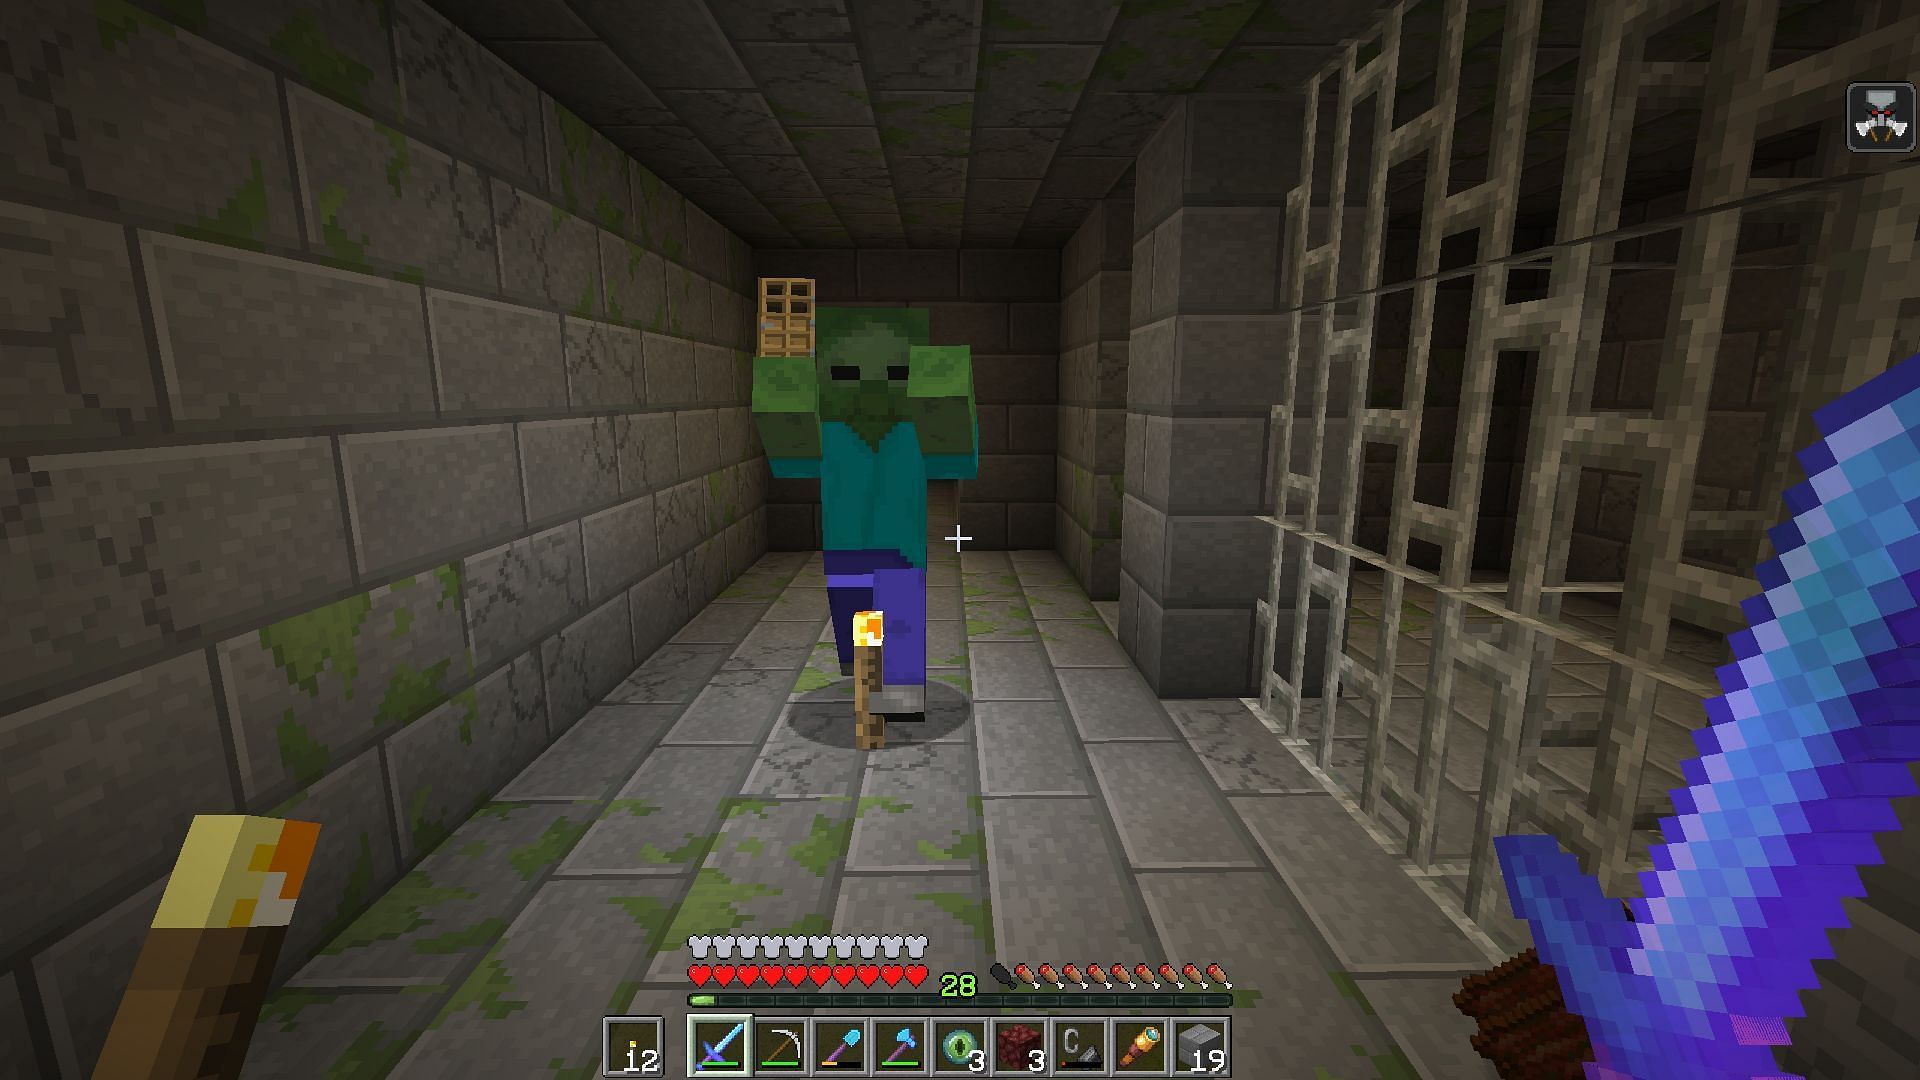 Some zombies can break down doors to attack players (Image via Mojang)